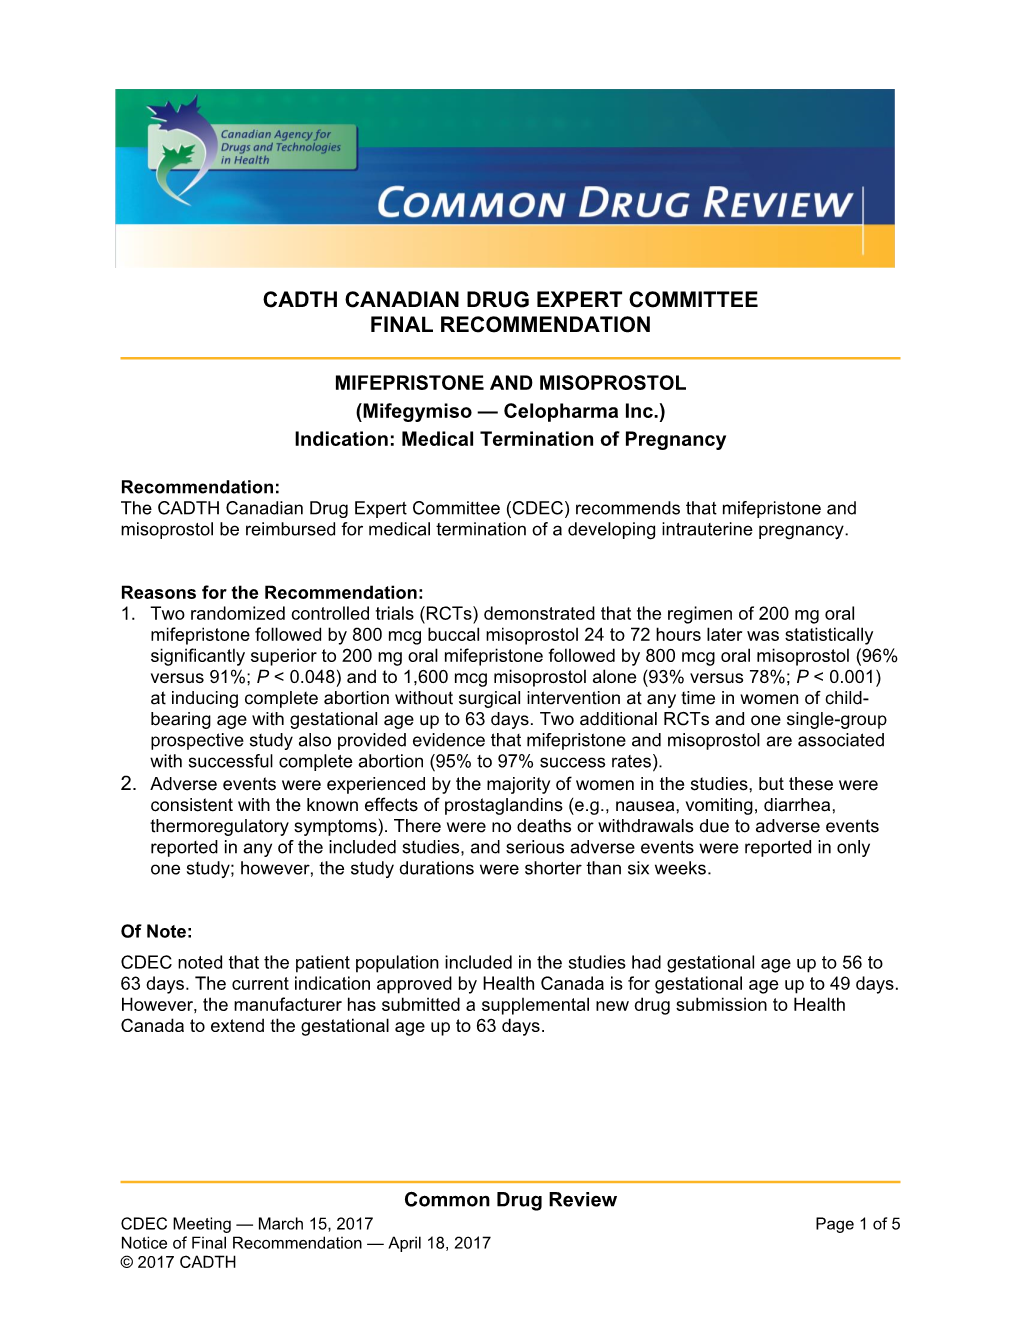 Cadth Canadian Drug Expert Committee Final Recommendation